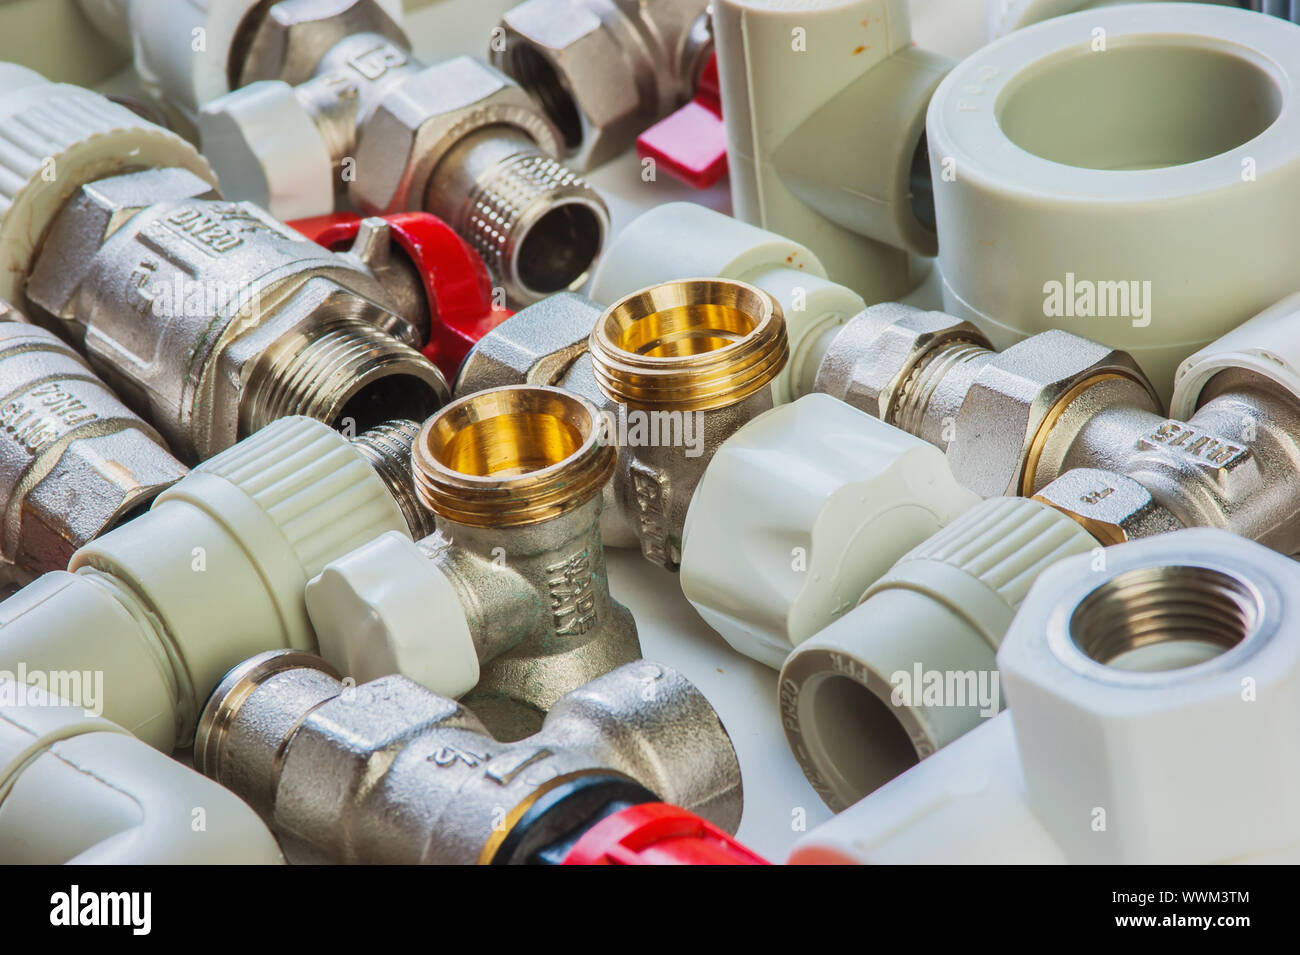 Plumbing fixtures and piping parts Stock Photo - Alamy